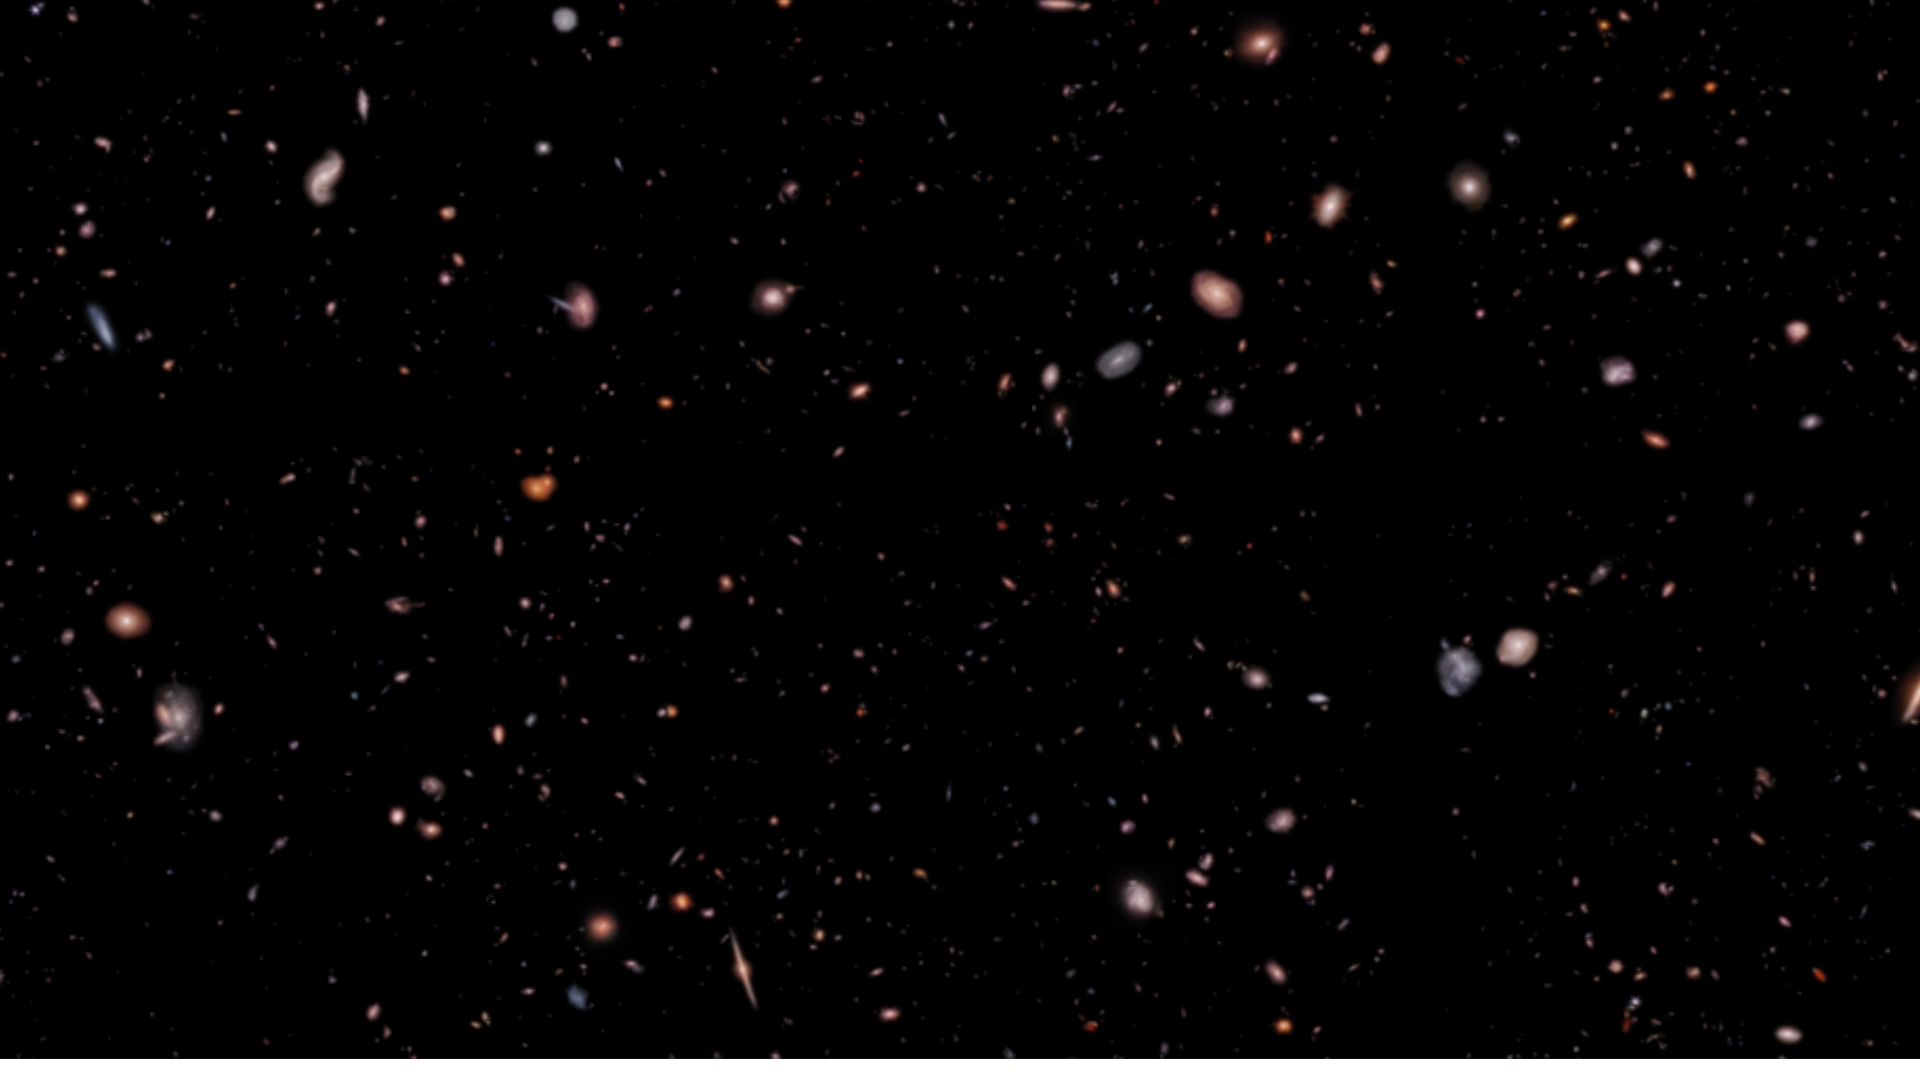 Black background filled with colorful galaxies of different shapes and sizes.